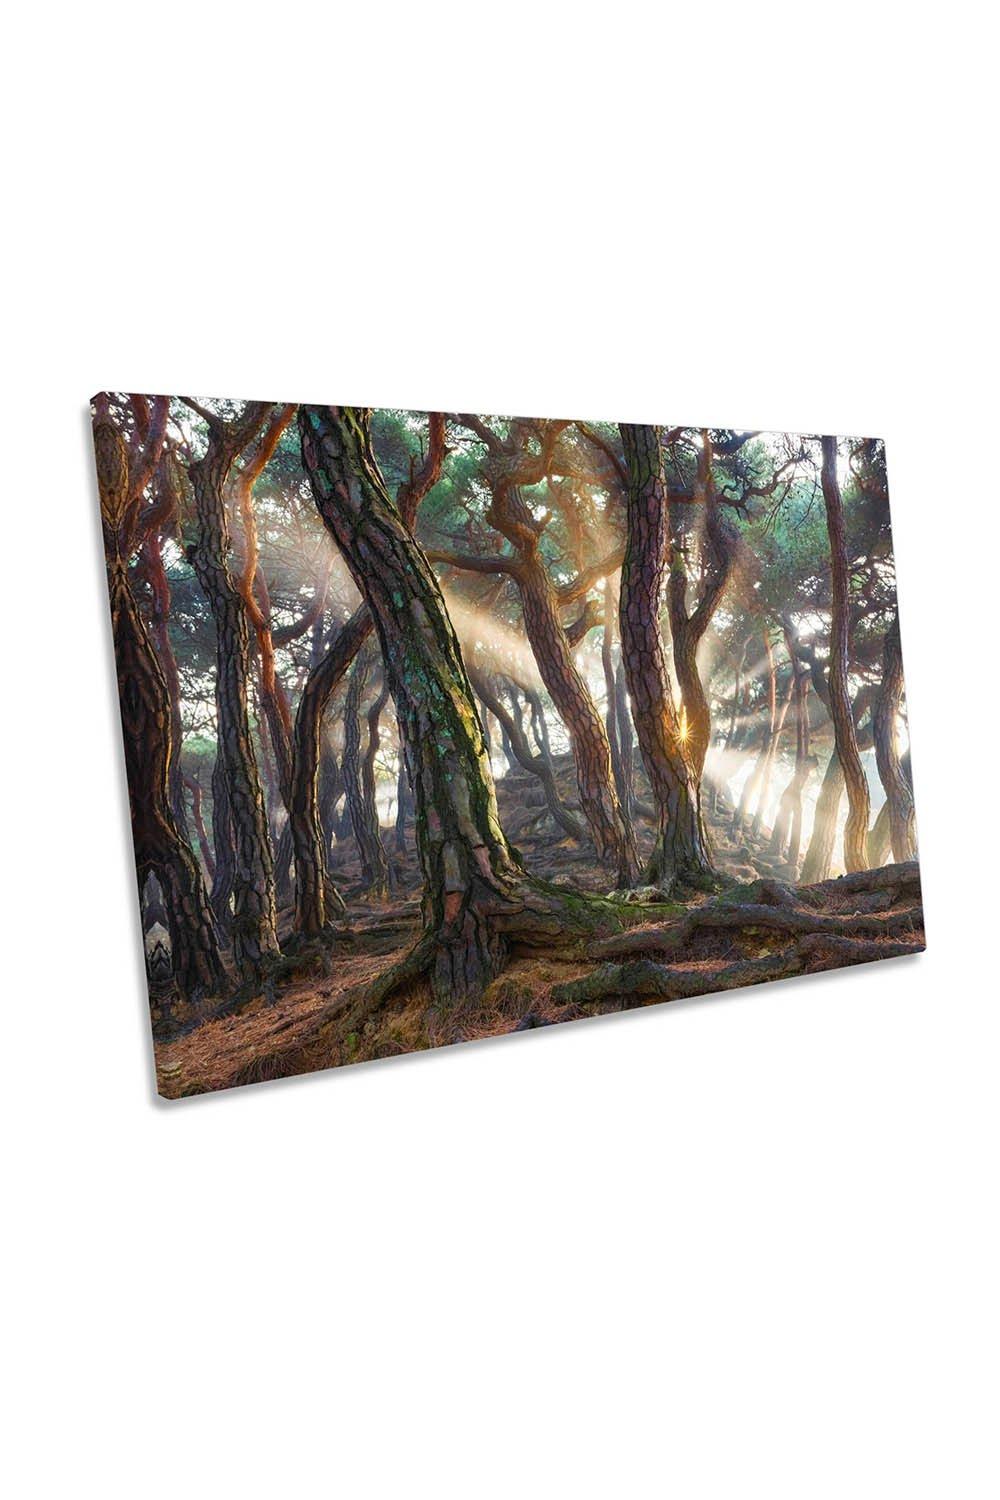 Sacred Pine Trees Sun Rays Woodland Canvas Wall Art Picture Print